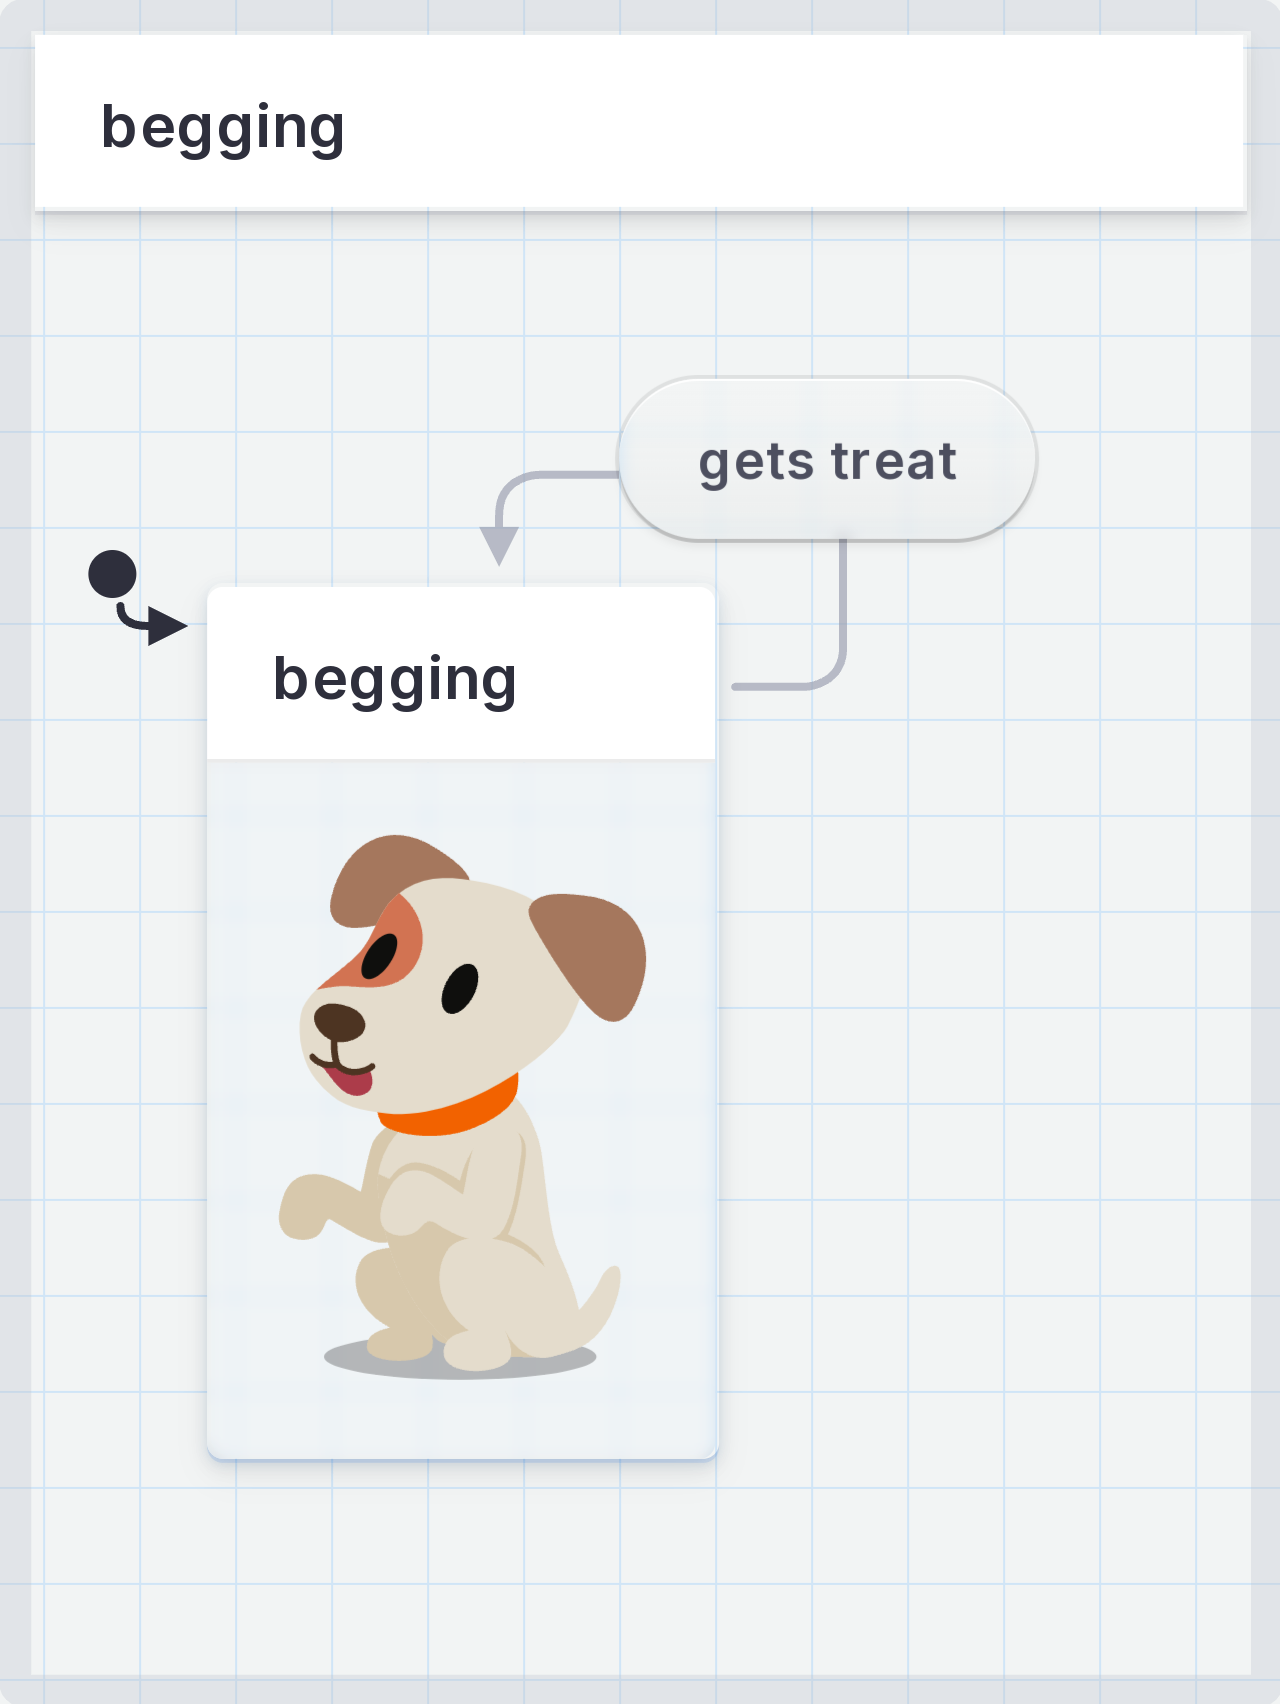 Dog begging machine with one begging state and a ‘gets treat’ transition which leaves and returns to the same state.